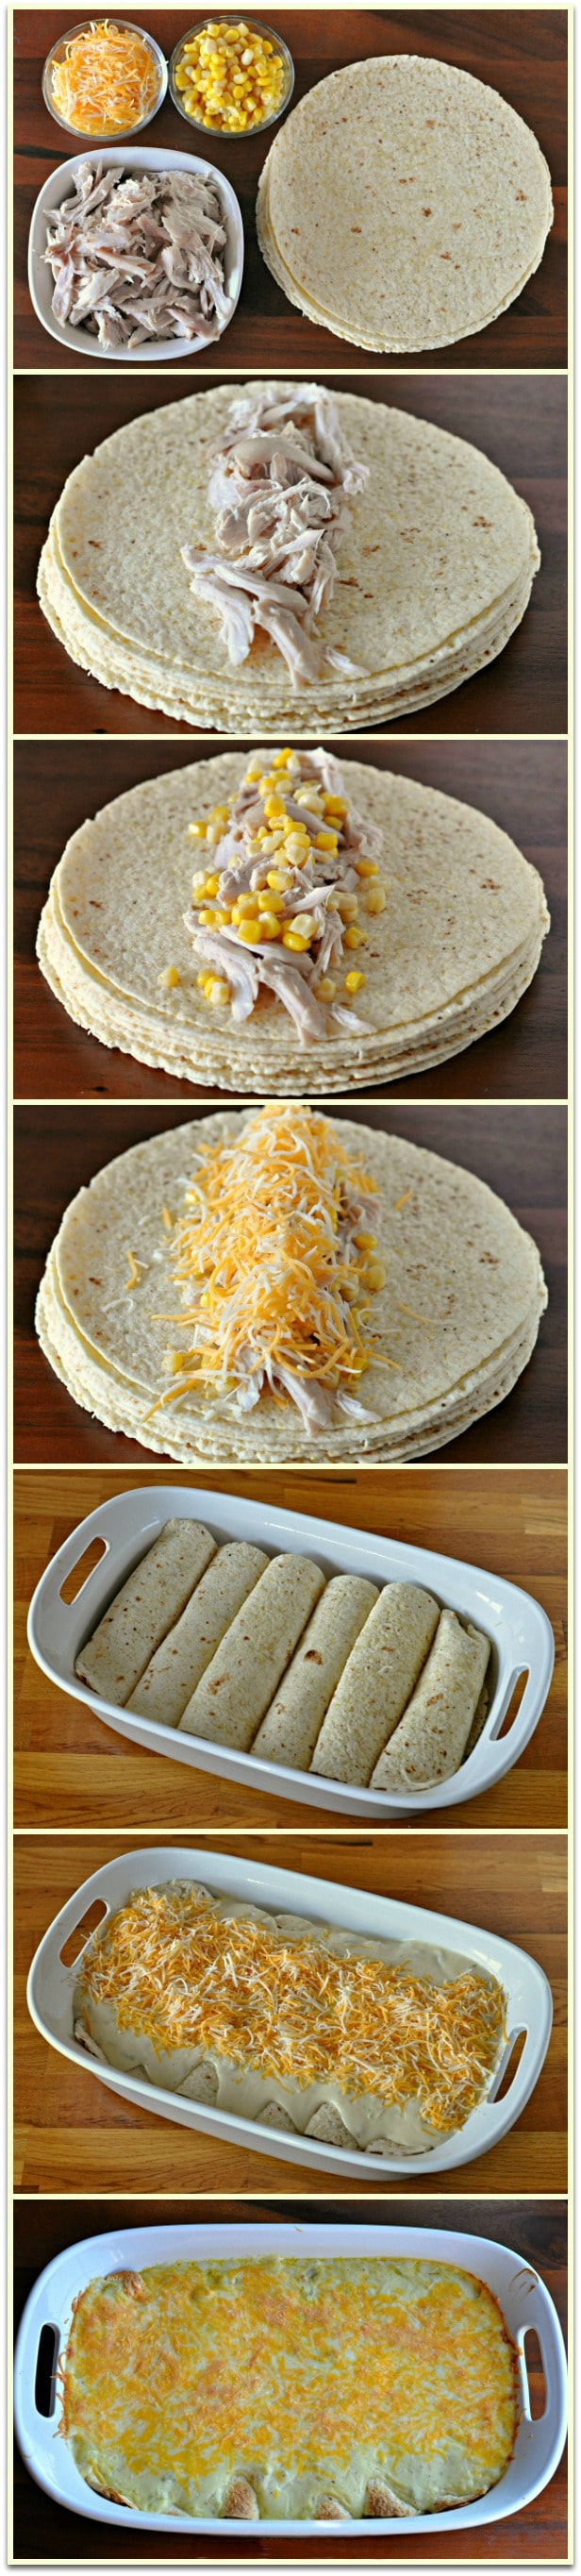 Creamy white chicken enchiladas being assembled and placed in a baking dish before covered with sauce and more cheese.